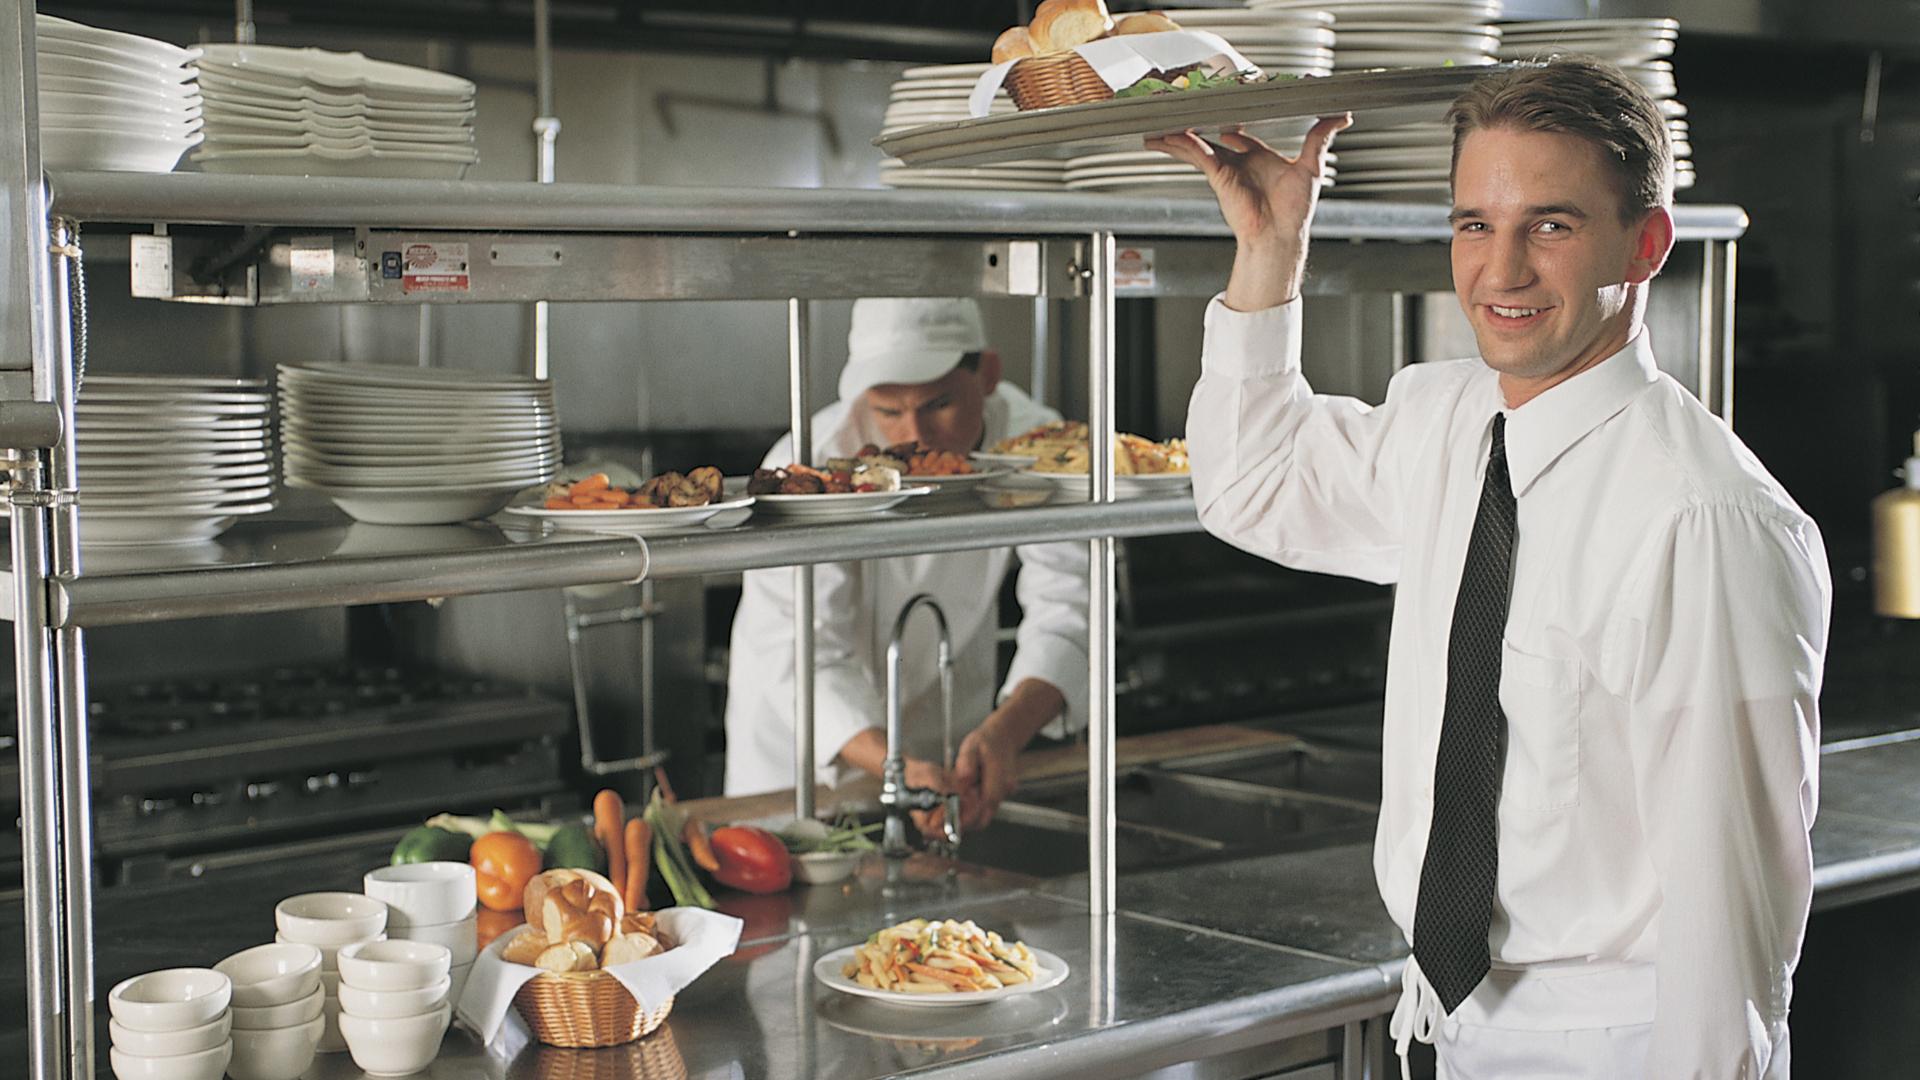 waiter smiling inside the kitchen while carrying dishes